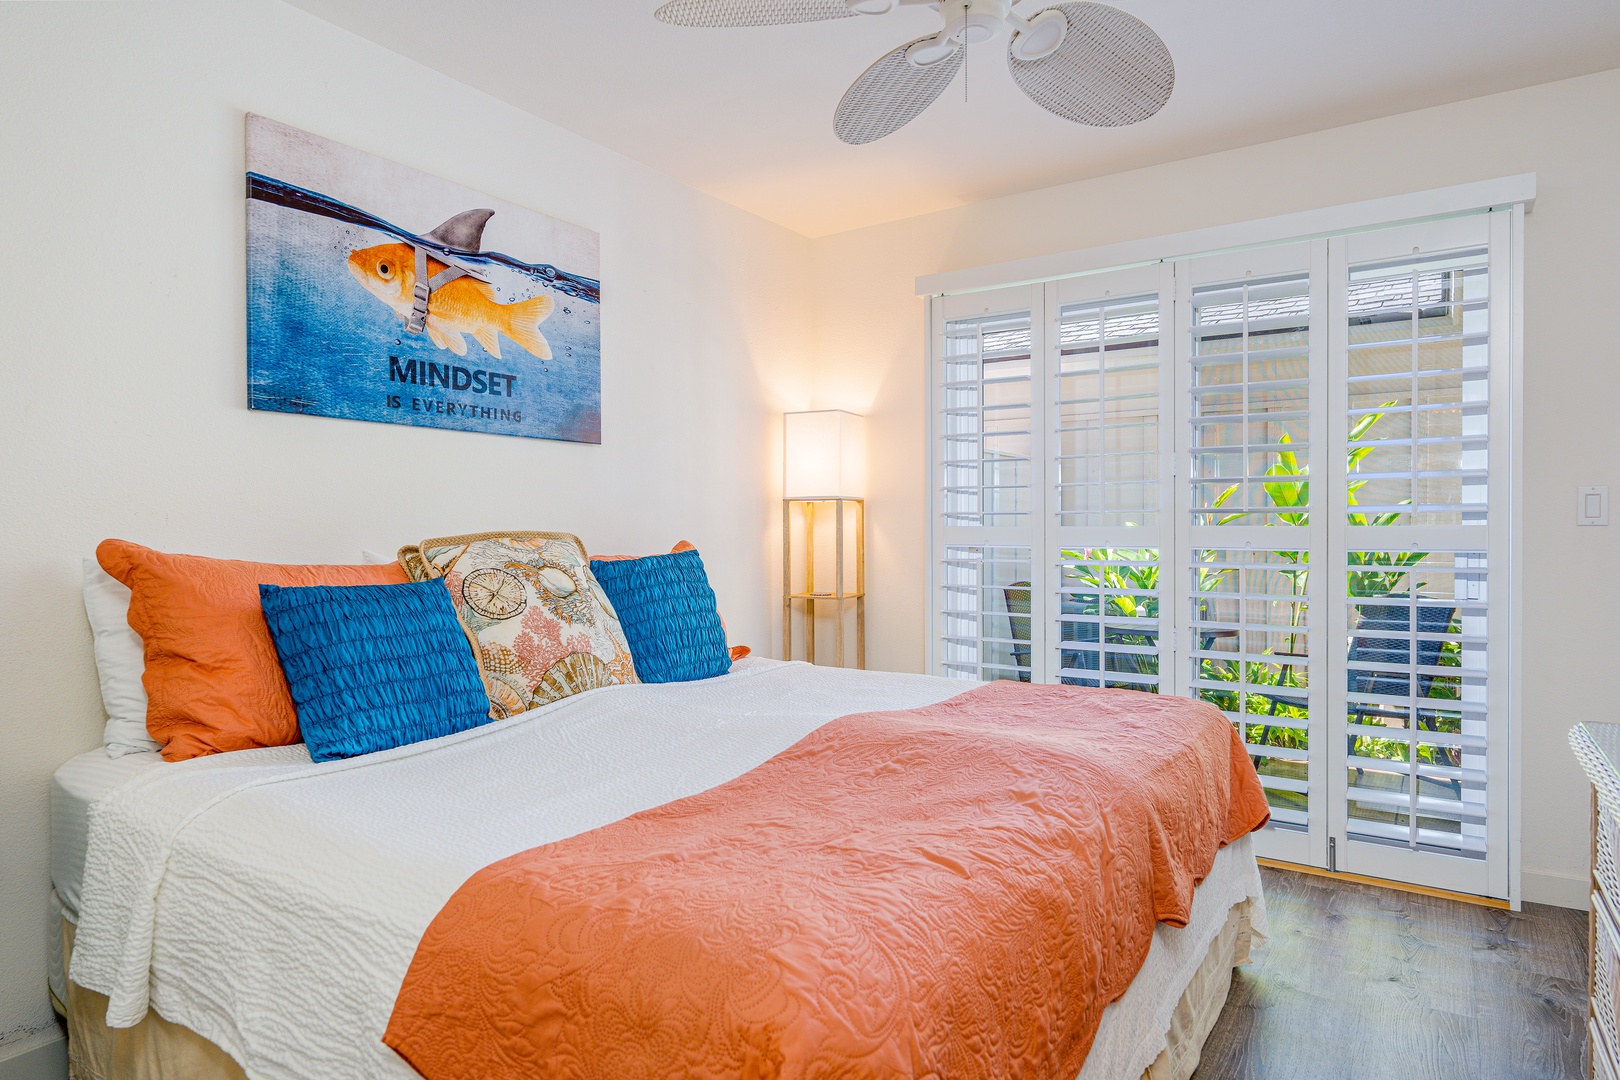 Kapolei Vacation Rentals, Coconut Plantation 1208-2 - A picture of the twin beds converted to a king bed.